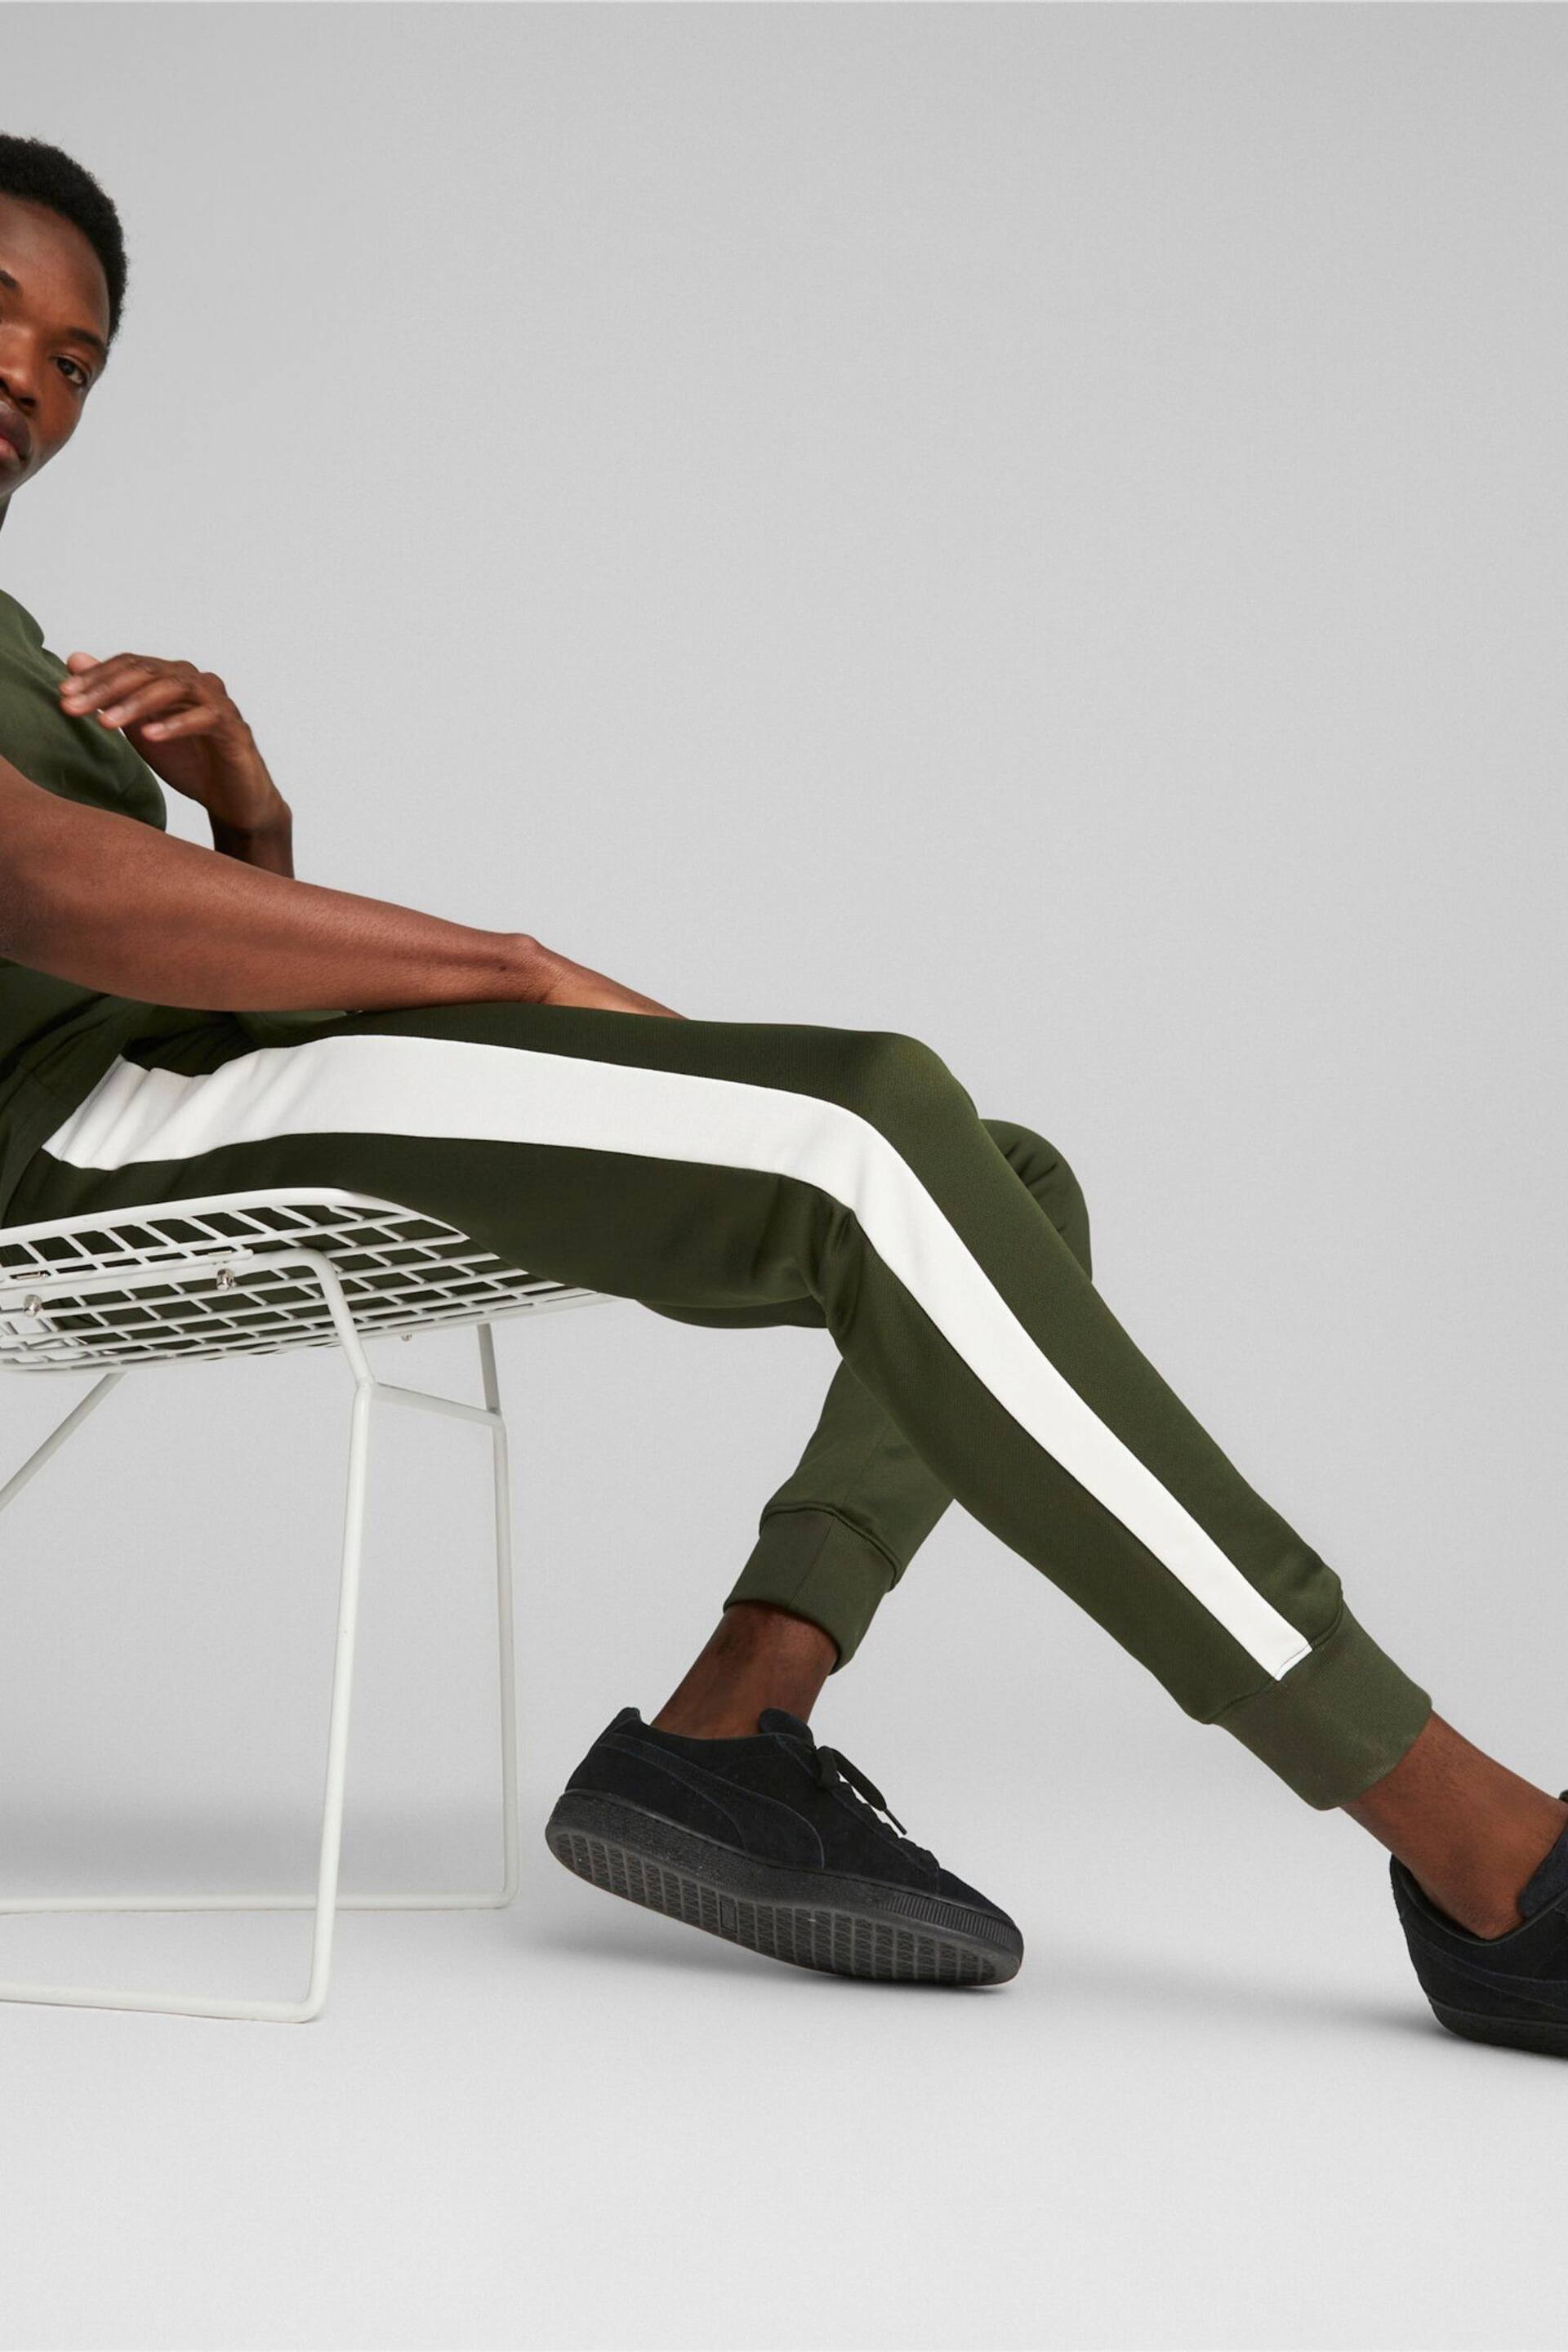 Puma Green T7 Iconic Mens Track Joggers - Image 3 of 7